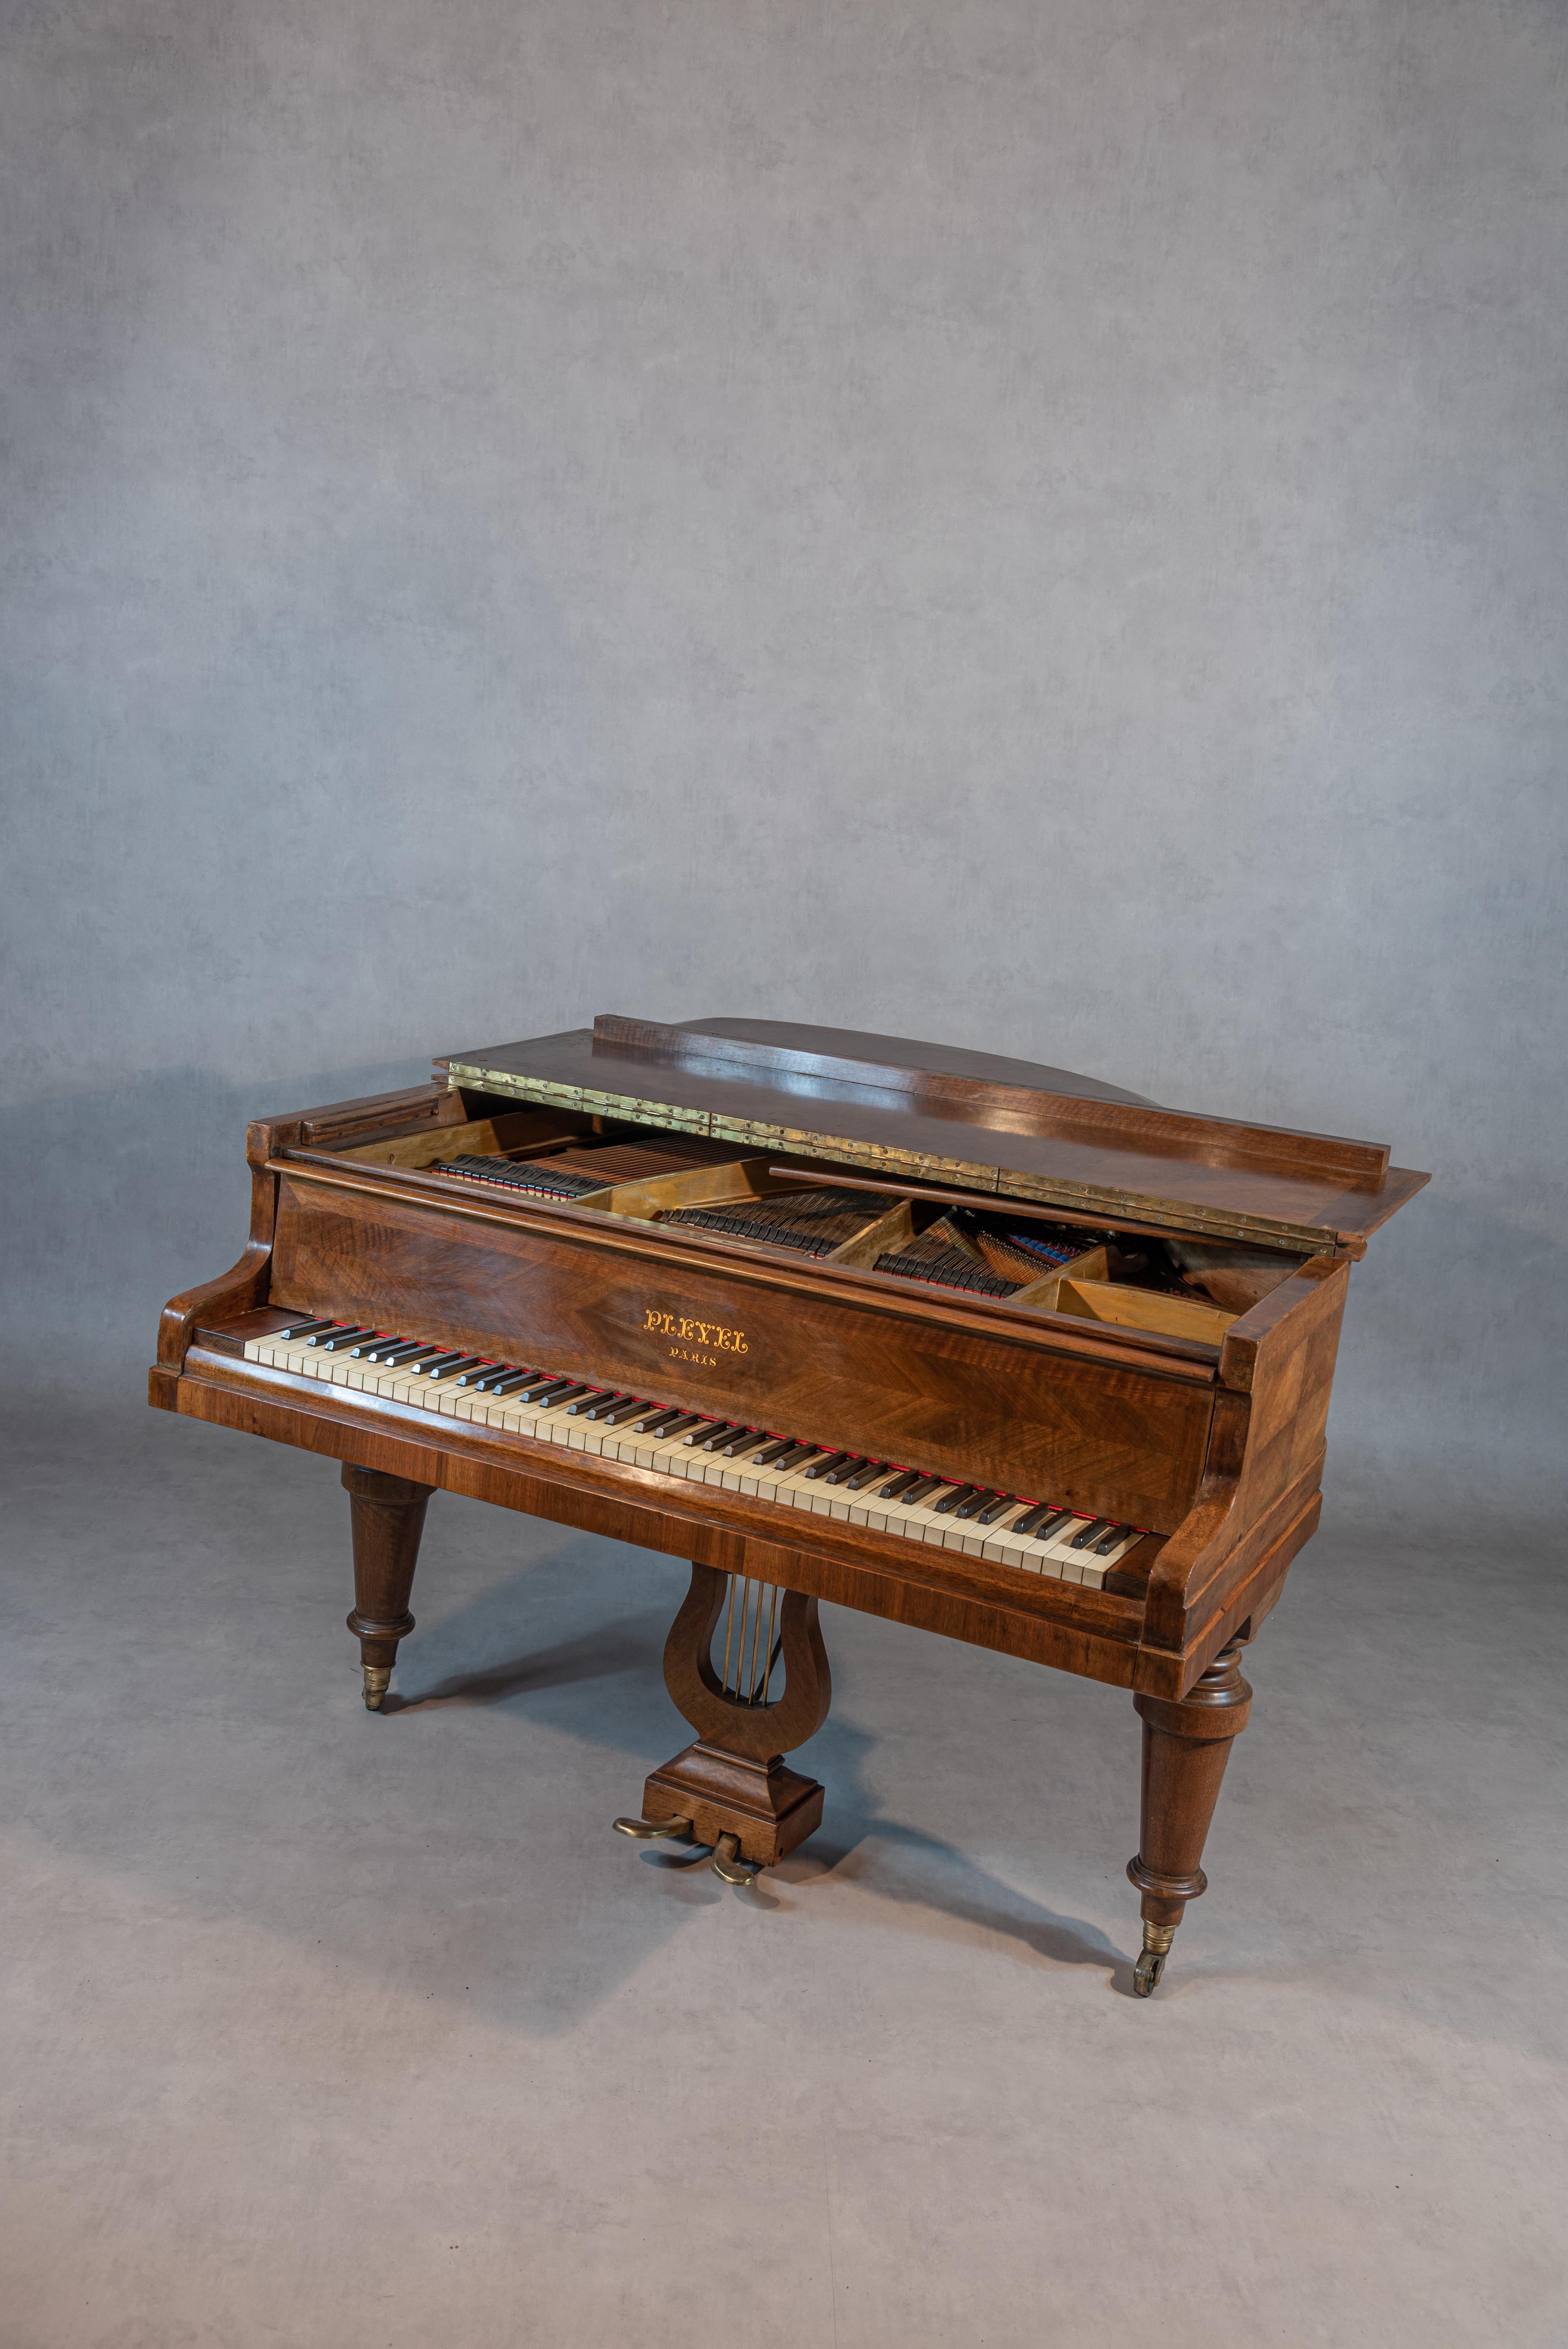 This French Early 20th Century Pleyel baby grand piano is truly exceptional. The Pleyel brand is legendary and has been favored by renowned composers such as Chopin, Debussy, and Ravel for its rich and unique sound. This particular piano is in